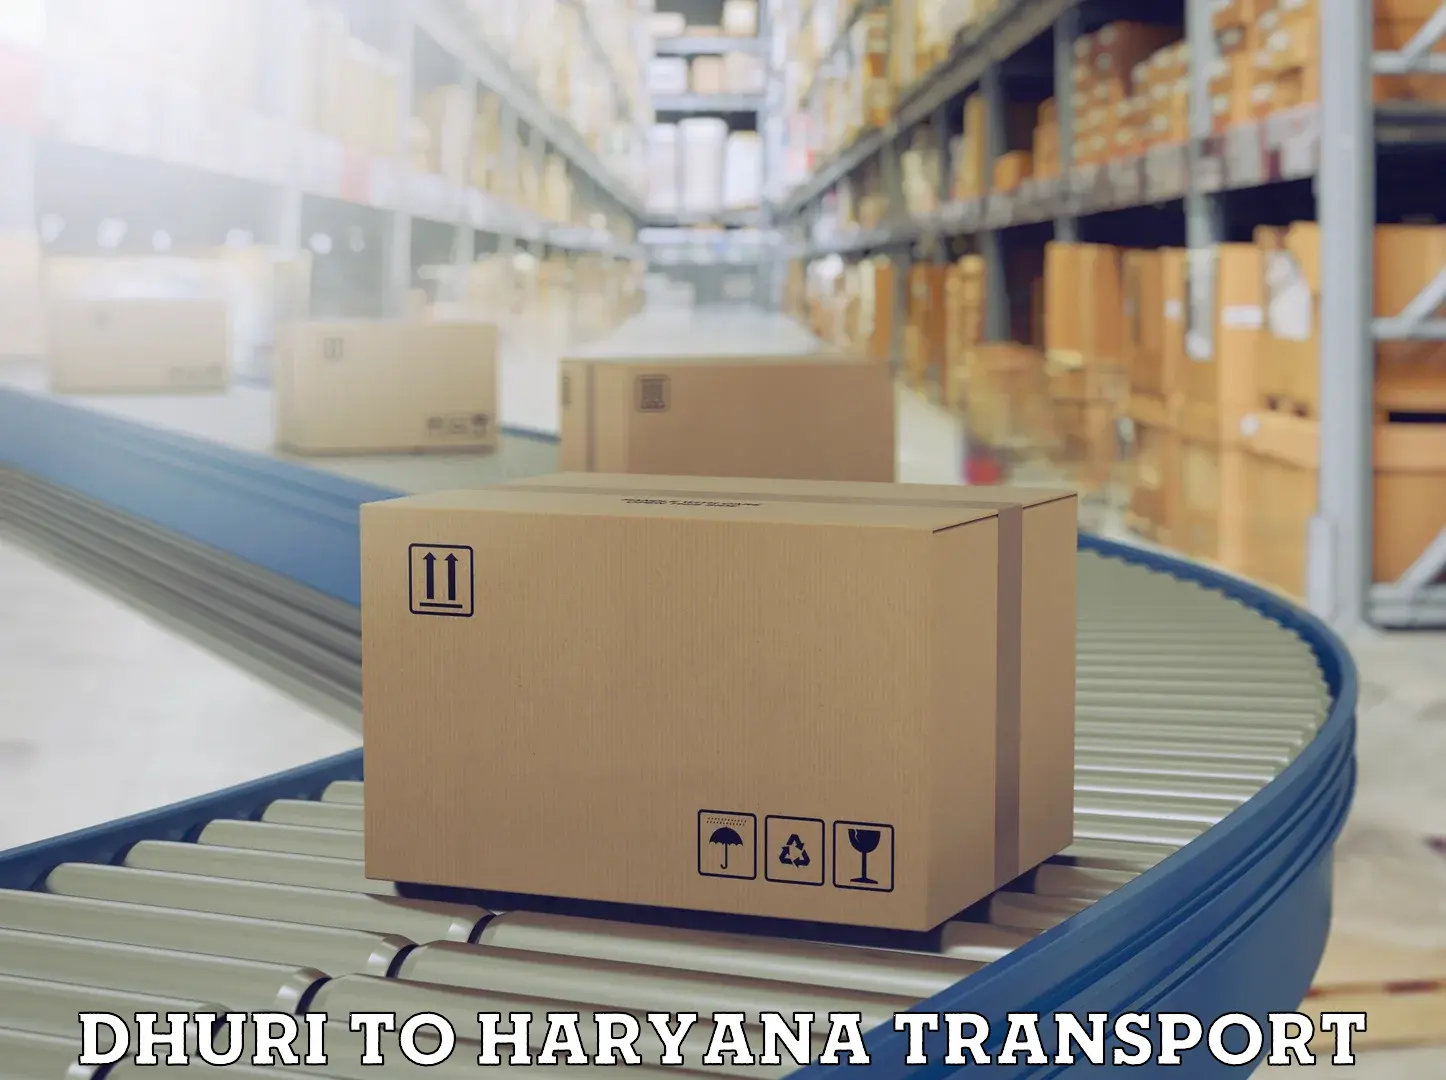 Truck transport companies in India in Dhuri to Chaudhary Charan Singh Haryana Agricultural University Hisar